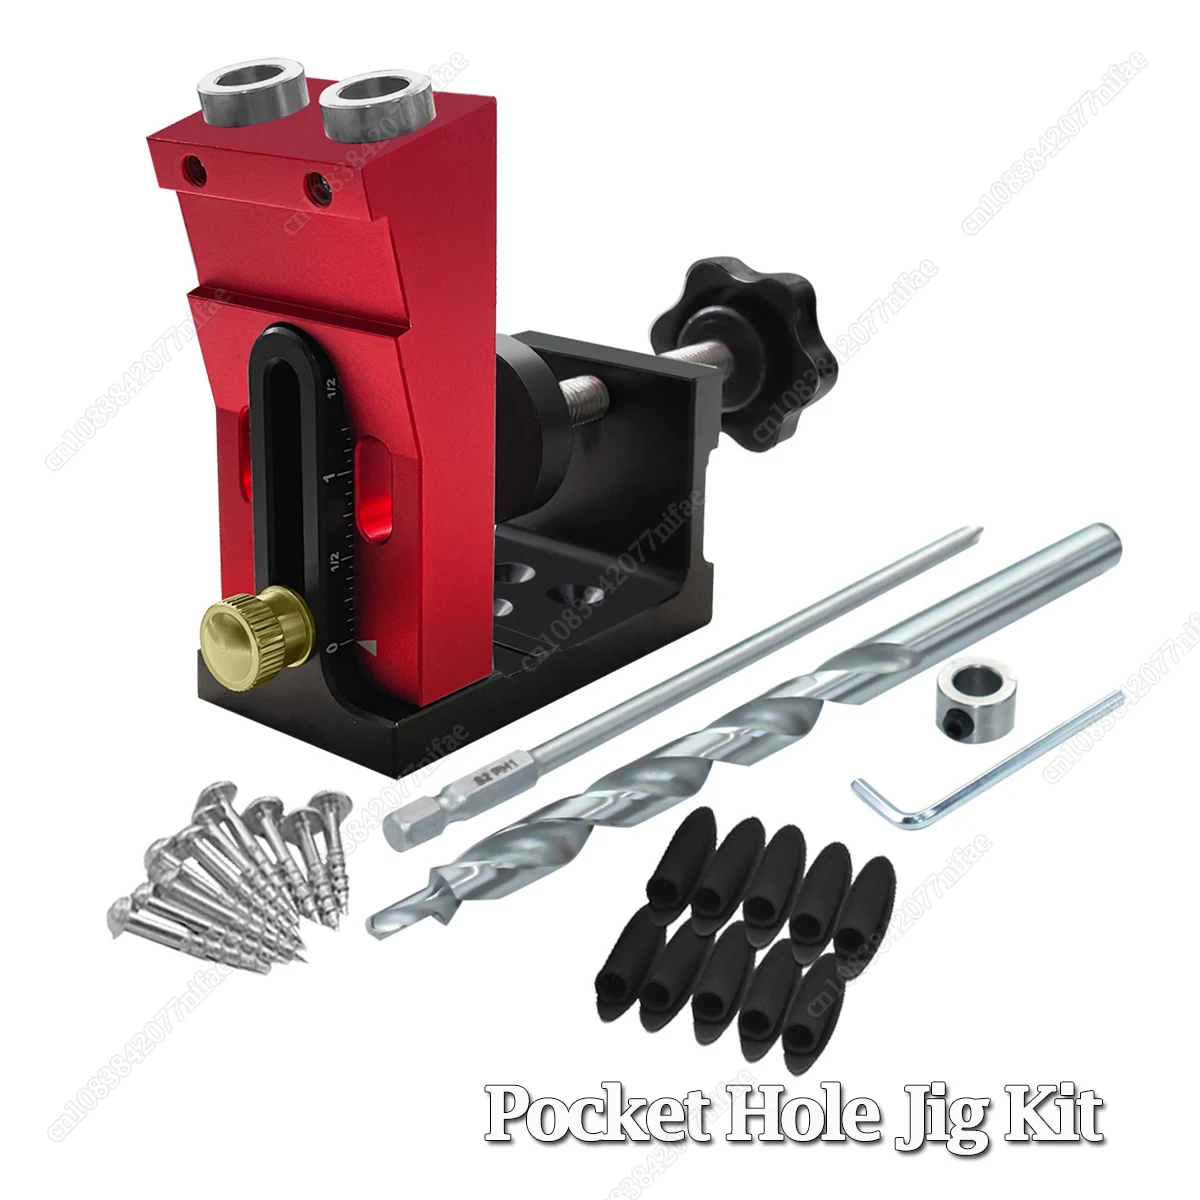 

Woodworking Pocket Hole Jig Kit Oblique Hole Puncher Locator with 3/8inch Drill Bit & Clamp Carpentry Drilling Guide 9.5mm